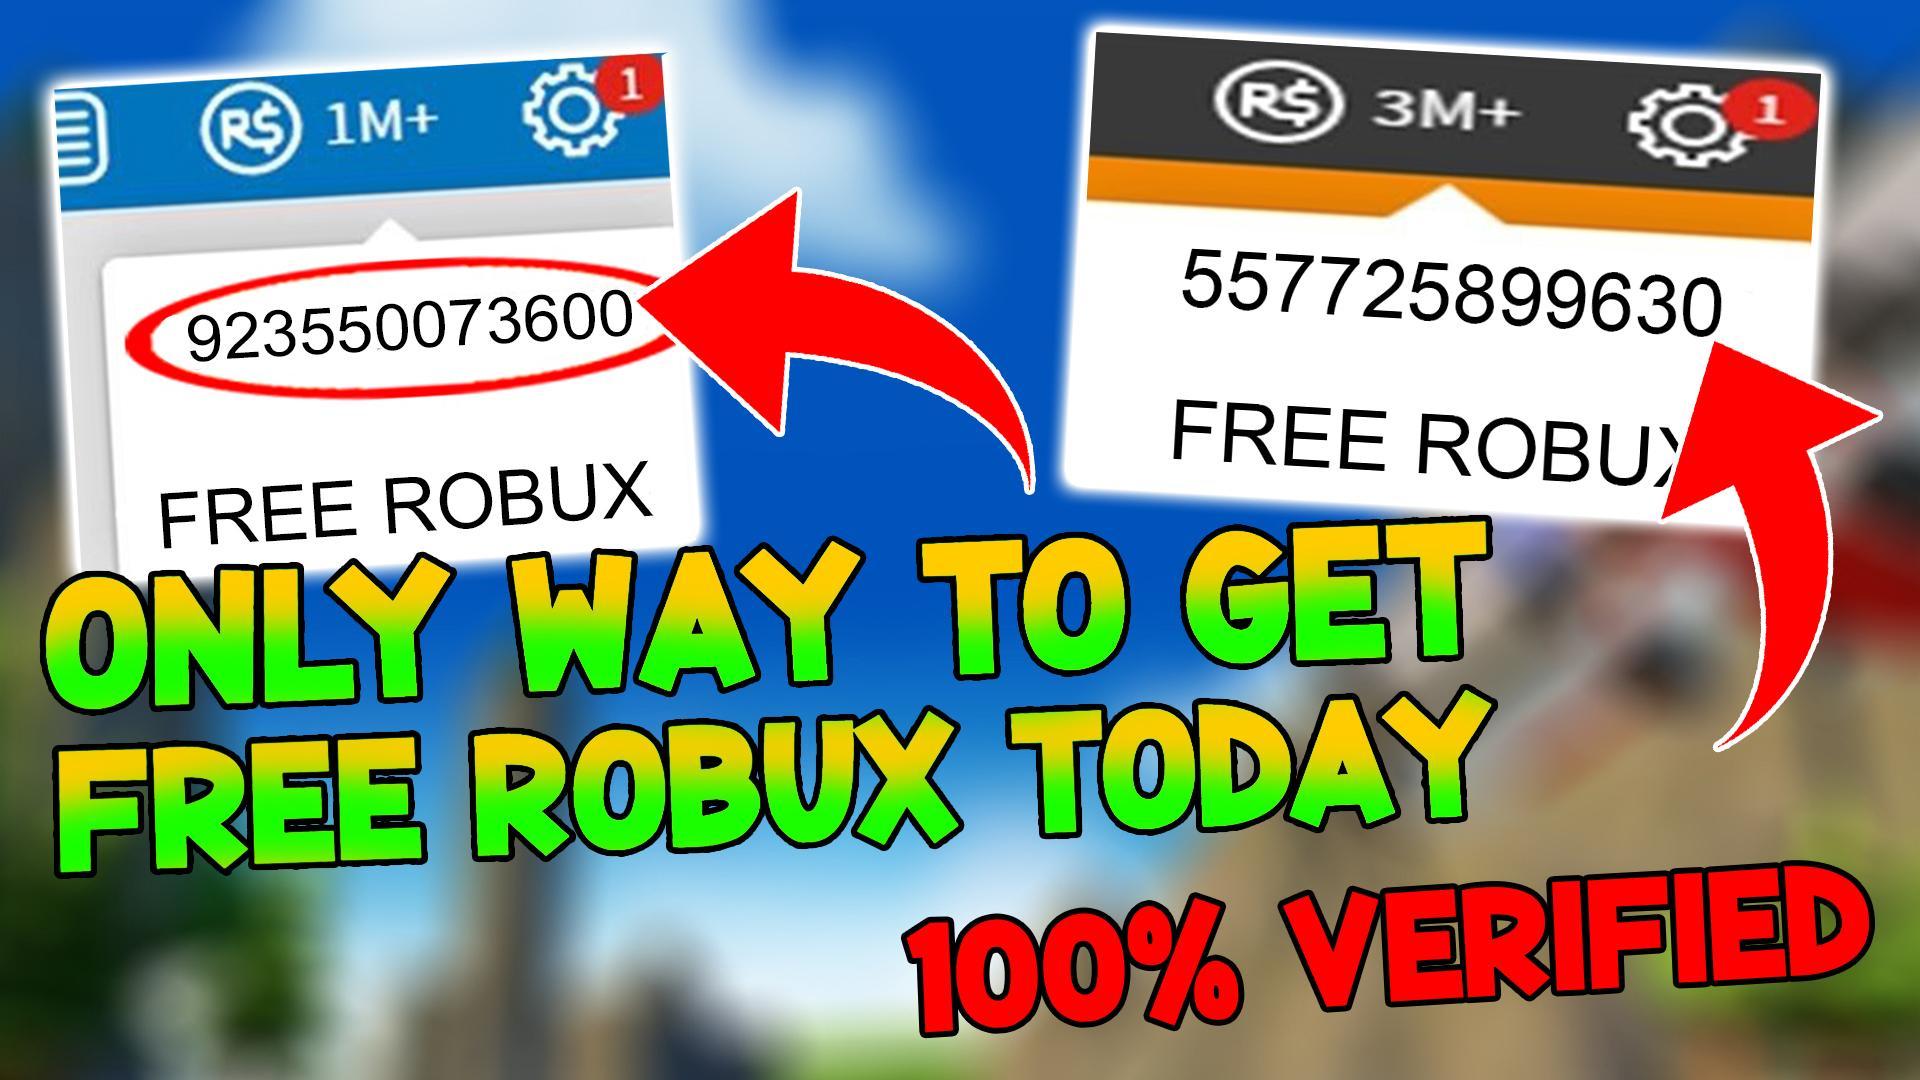 How To Get Unlimited Free Robux 2020 For Android Apk Download - robux vk